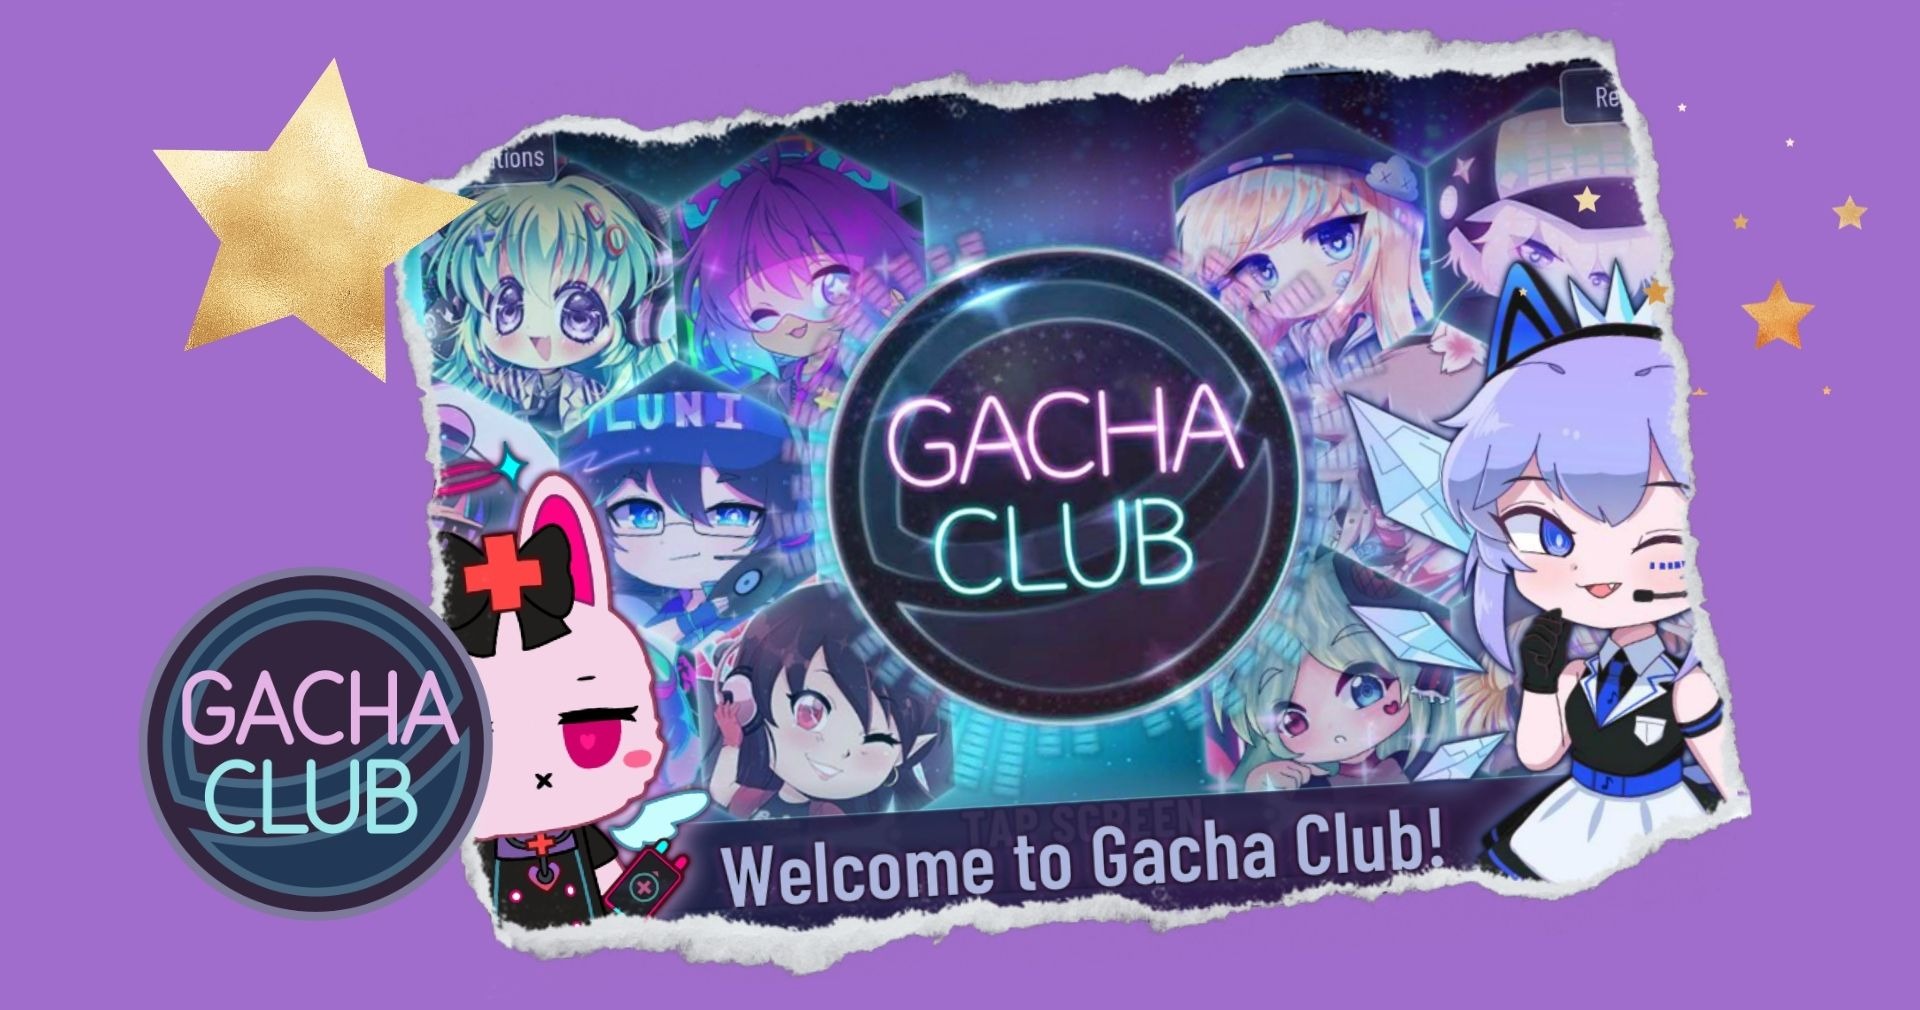 Buy Gacha Life Class Schedule Printable Letter Size Online in India 